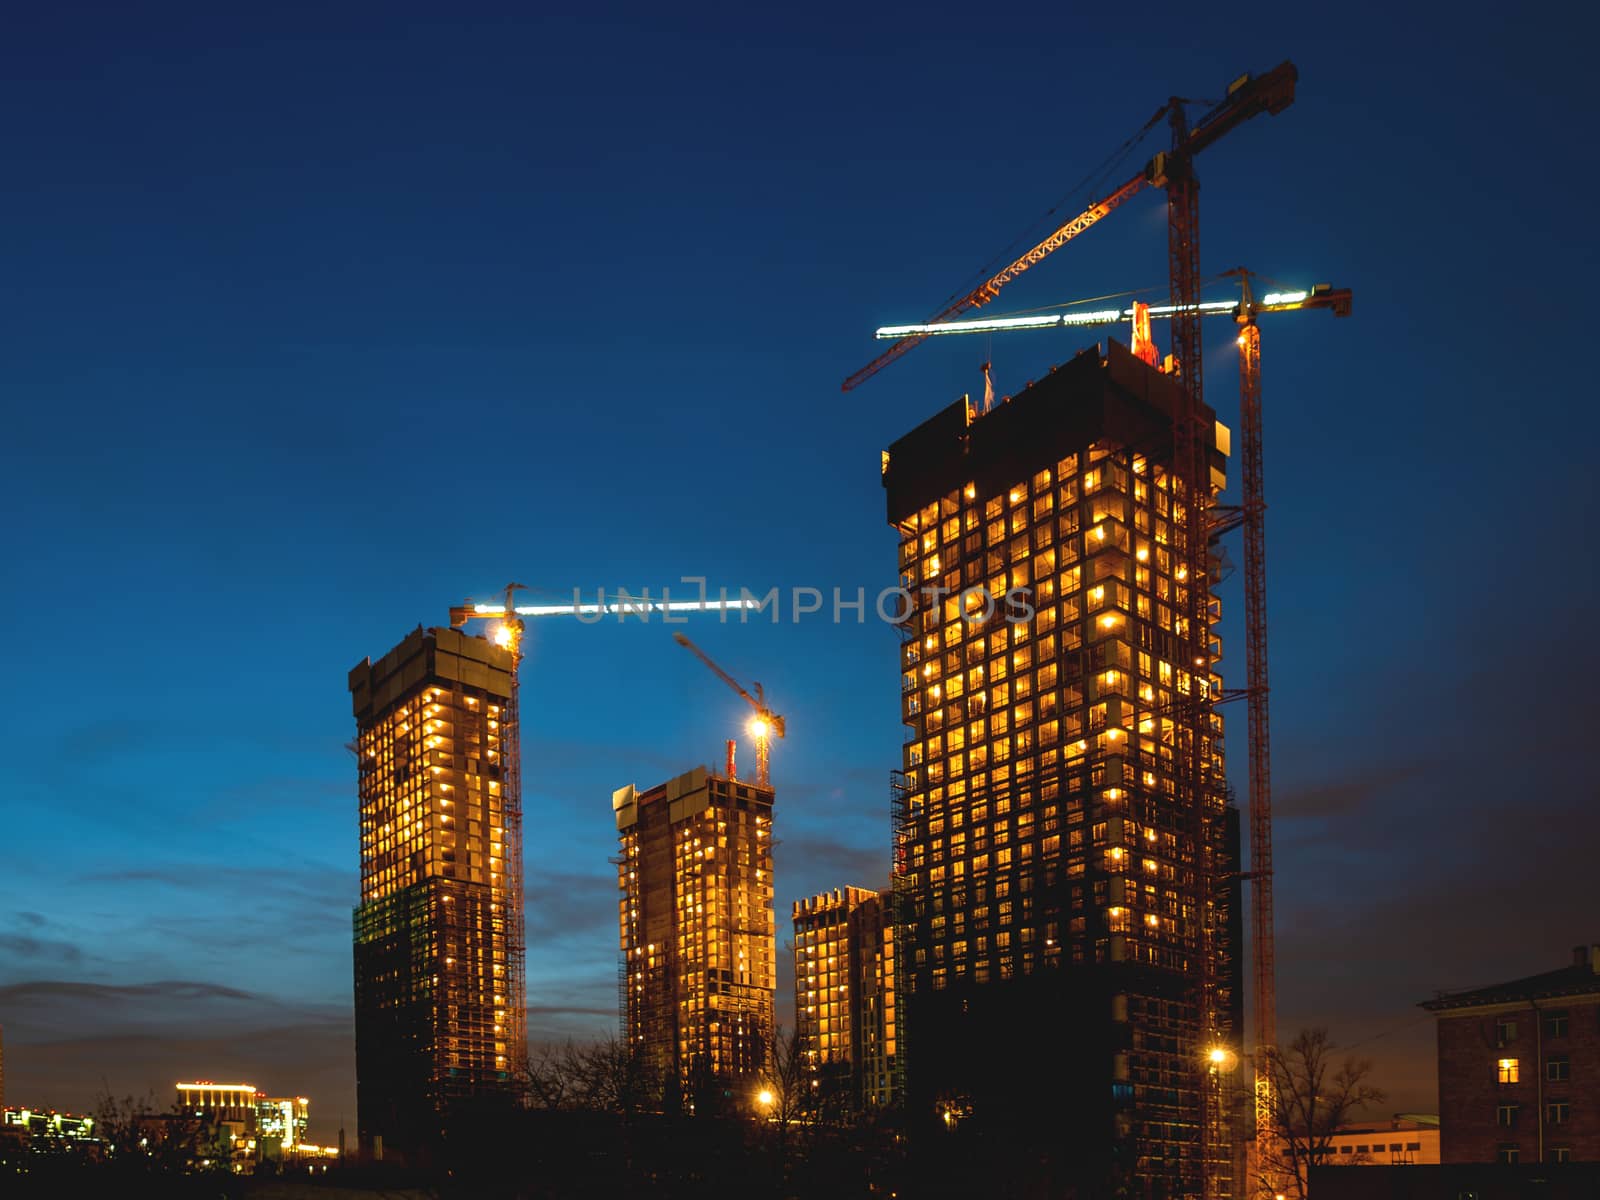 Night view on construction site. Construction cranes near future high-rise apartment building. Moscow, Russia.